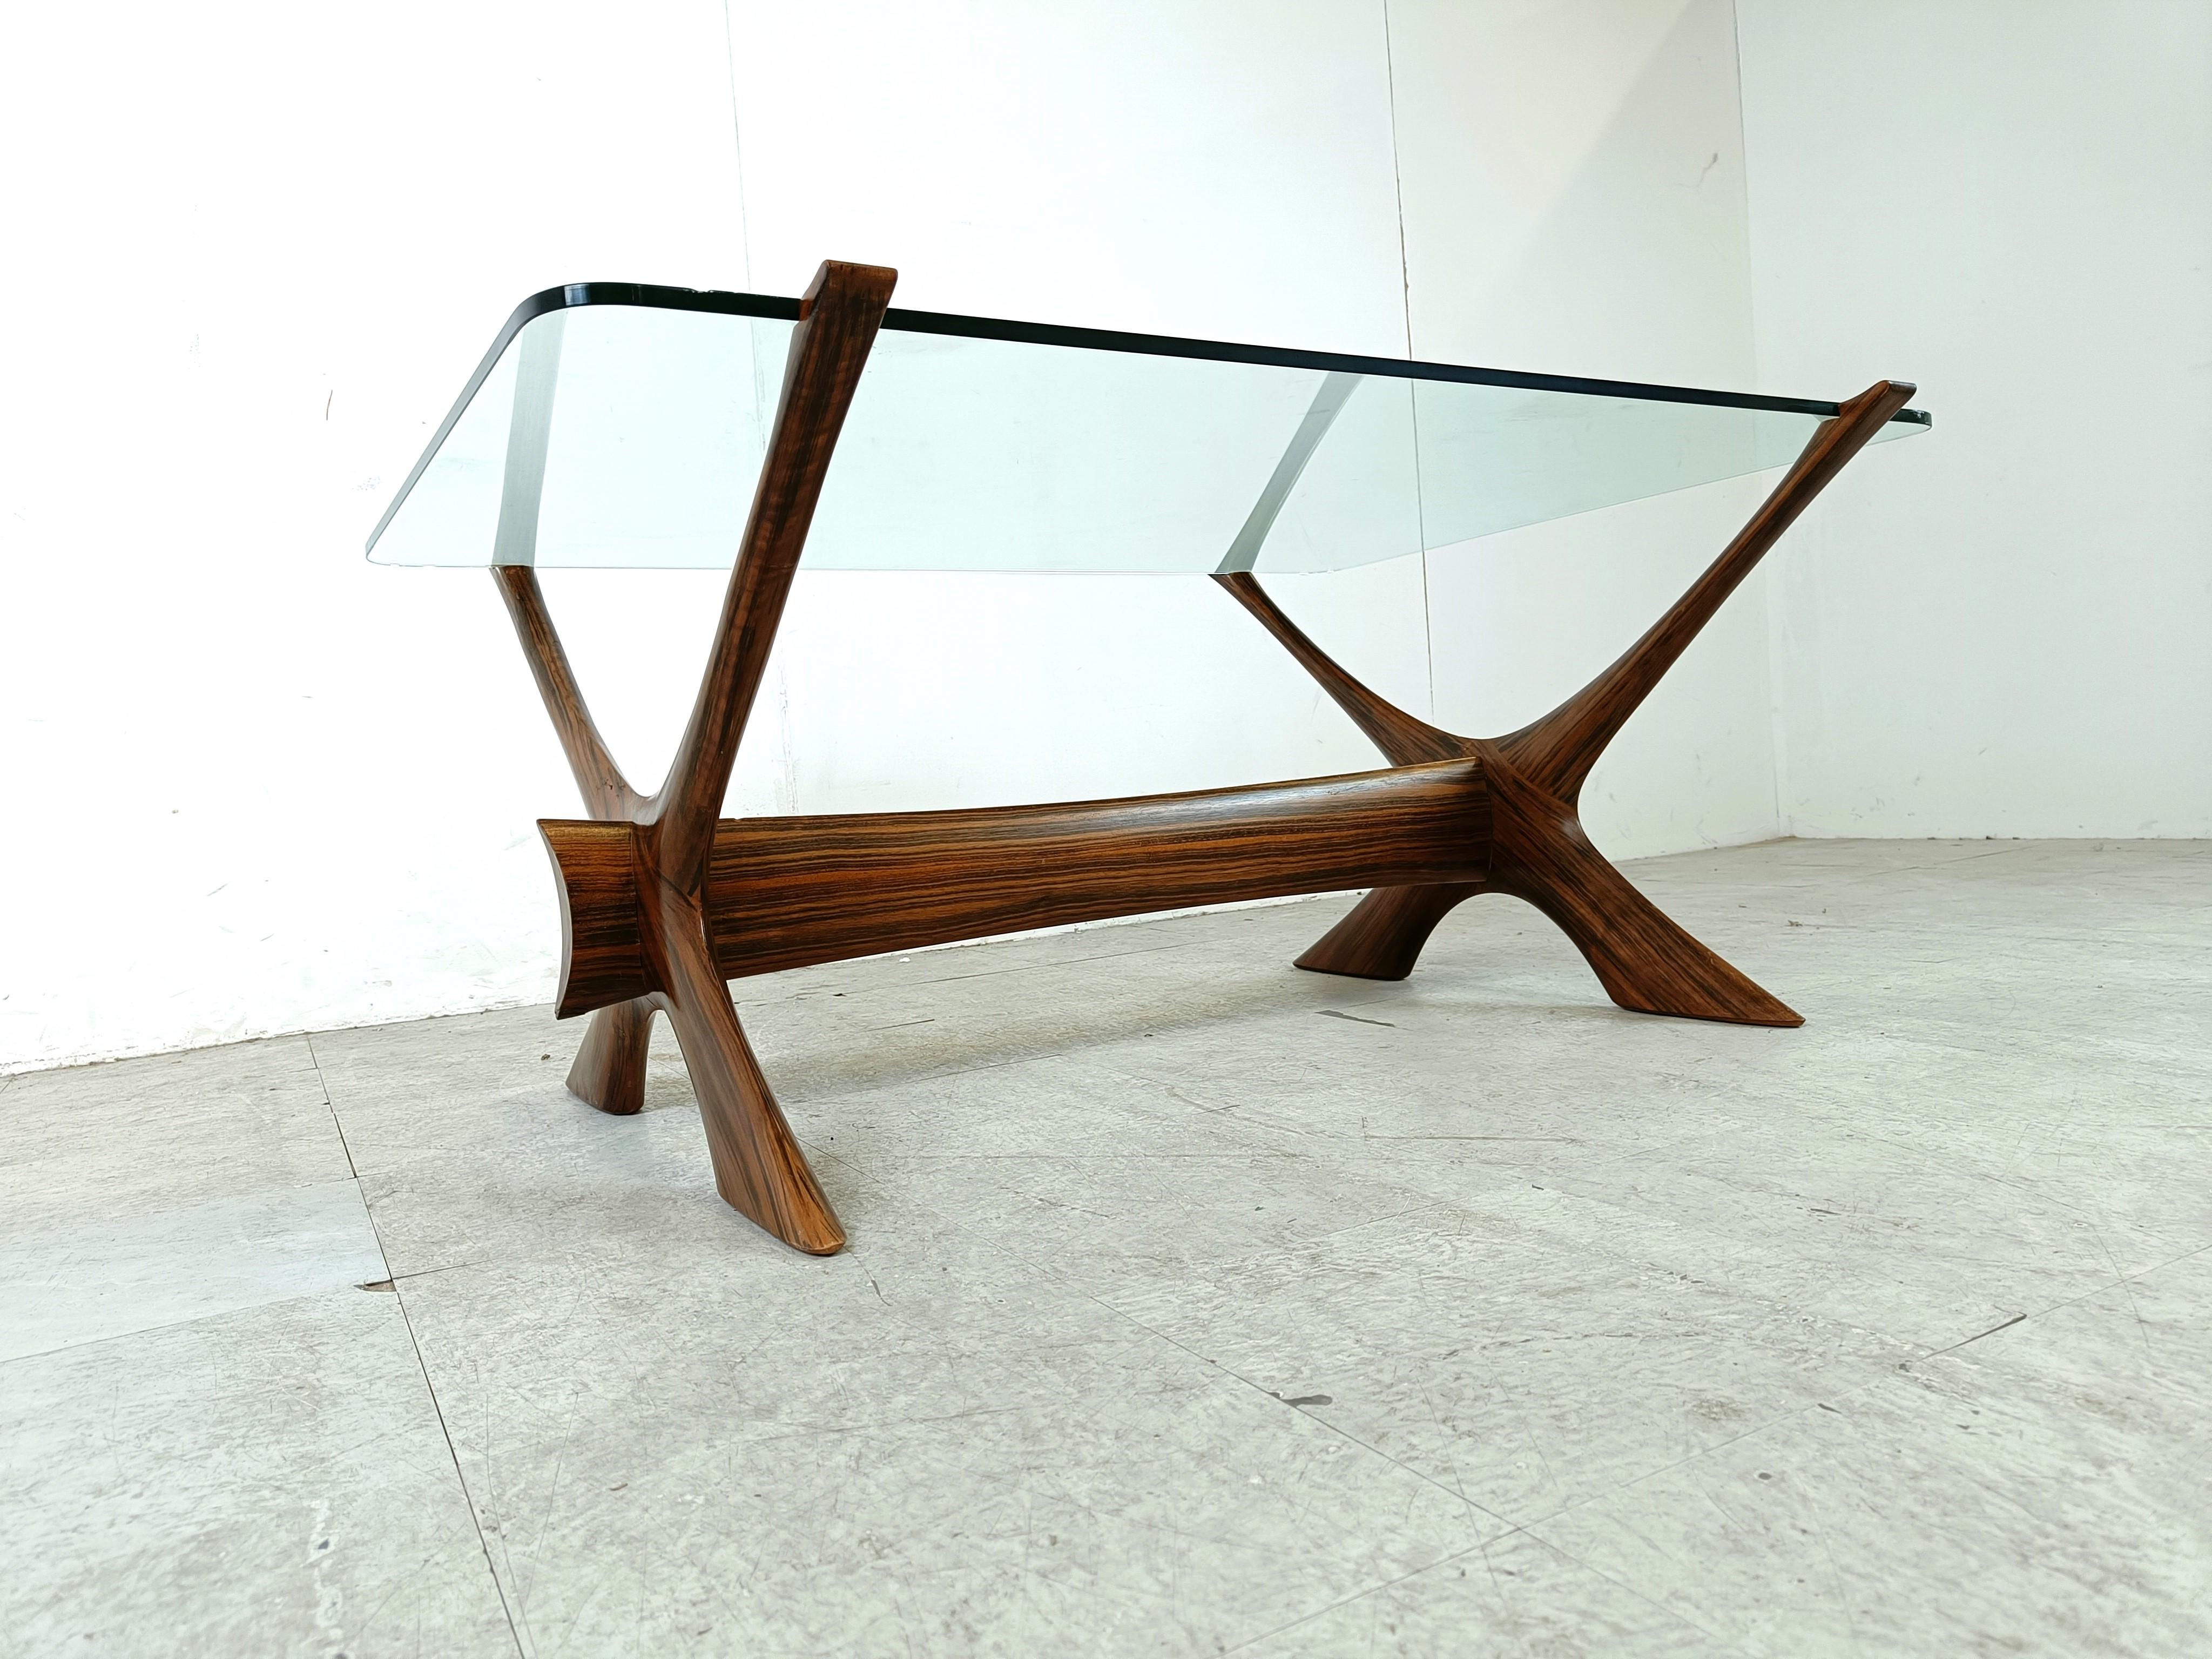 Condor Coffee Table by Fredrik Schriever-Abeln, Sweden, 1960s For Sale 2